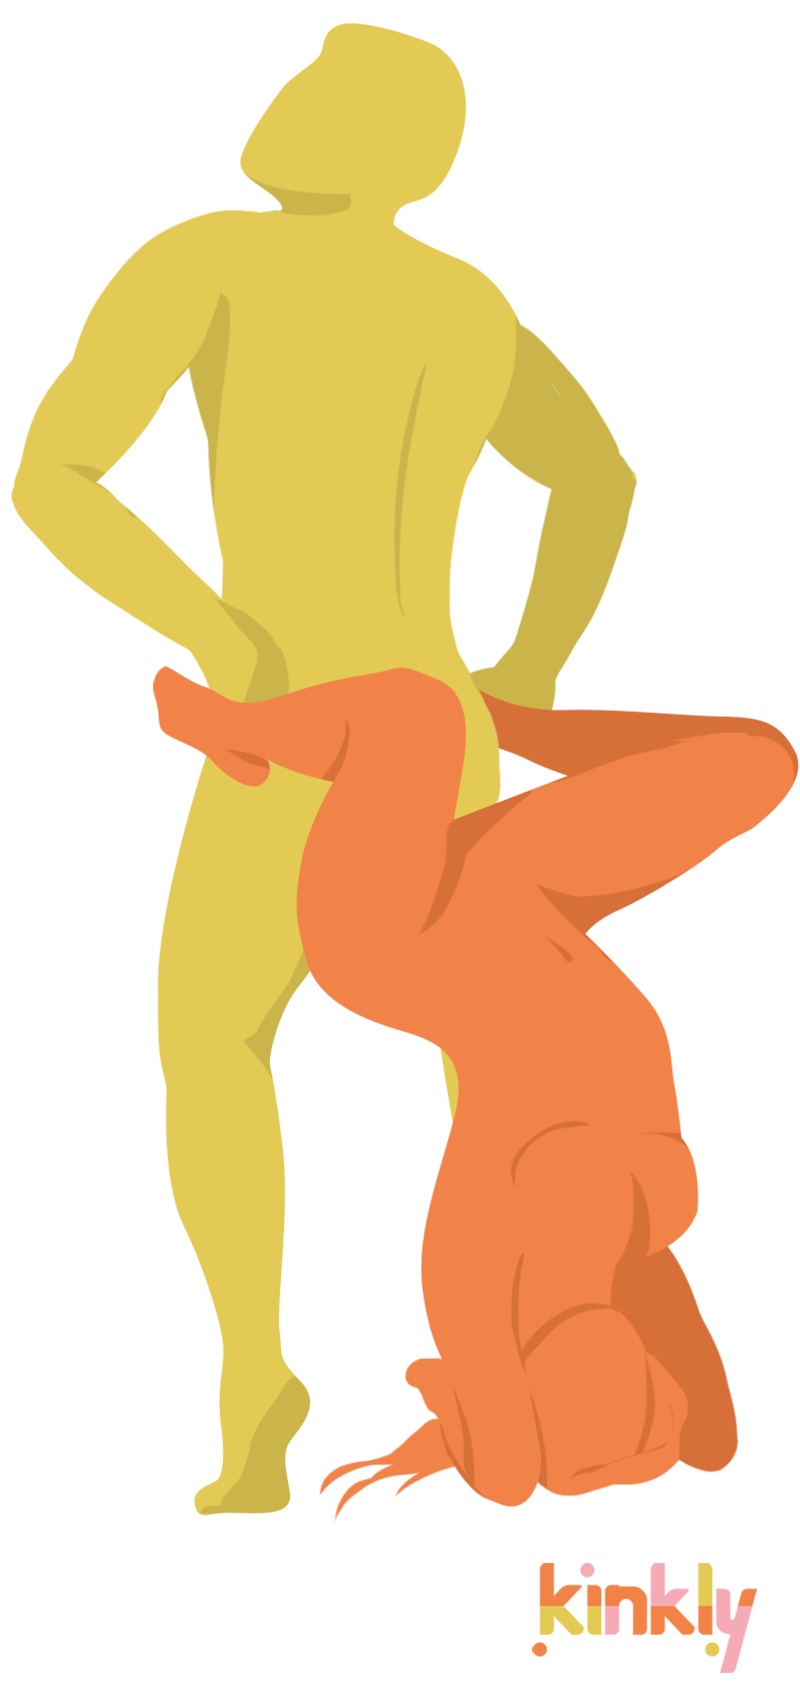 Spider Monkey Sex Position. The penetrating partner is standing. The receiving partner does a headstand with their hips up against the penetrating partner's butt. The penetrating partner then achieves penetration.